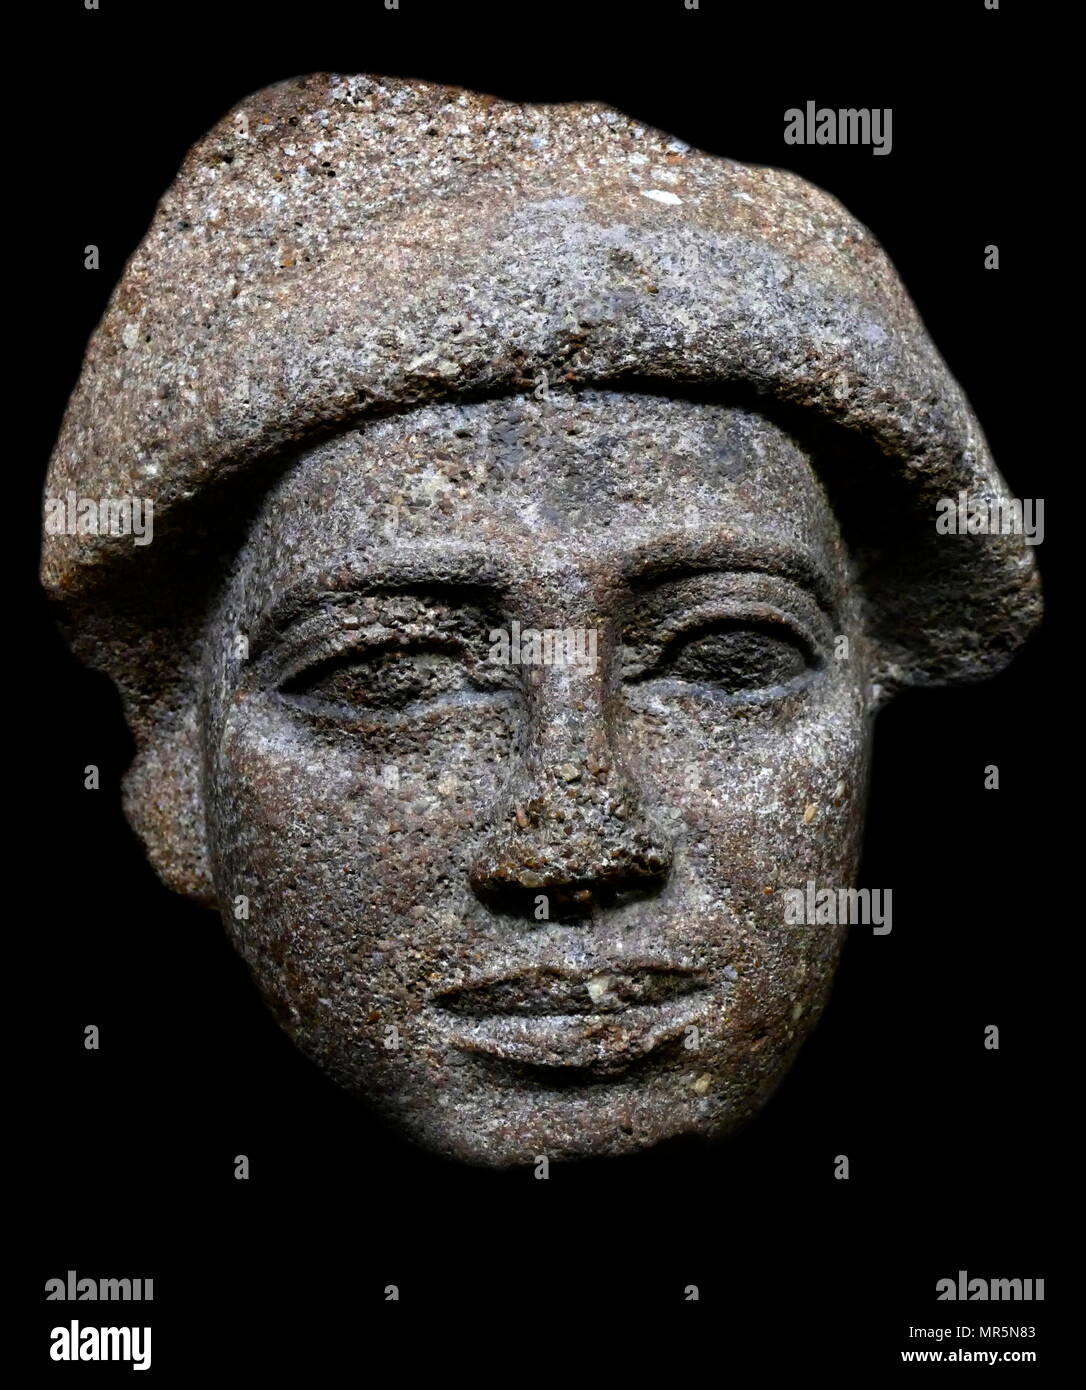 Quartzite head of Ptahshepses; vizier and son-in-law of the Fifth Dynasty pharaoh Nyuserre Ini. Nyuserre Ini was an Ancient Egyptian pharaoh, the sixth ruler of the Fifth Dynasty during the Old Kingdom period. 25th century BC Stock Photo